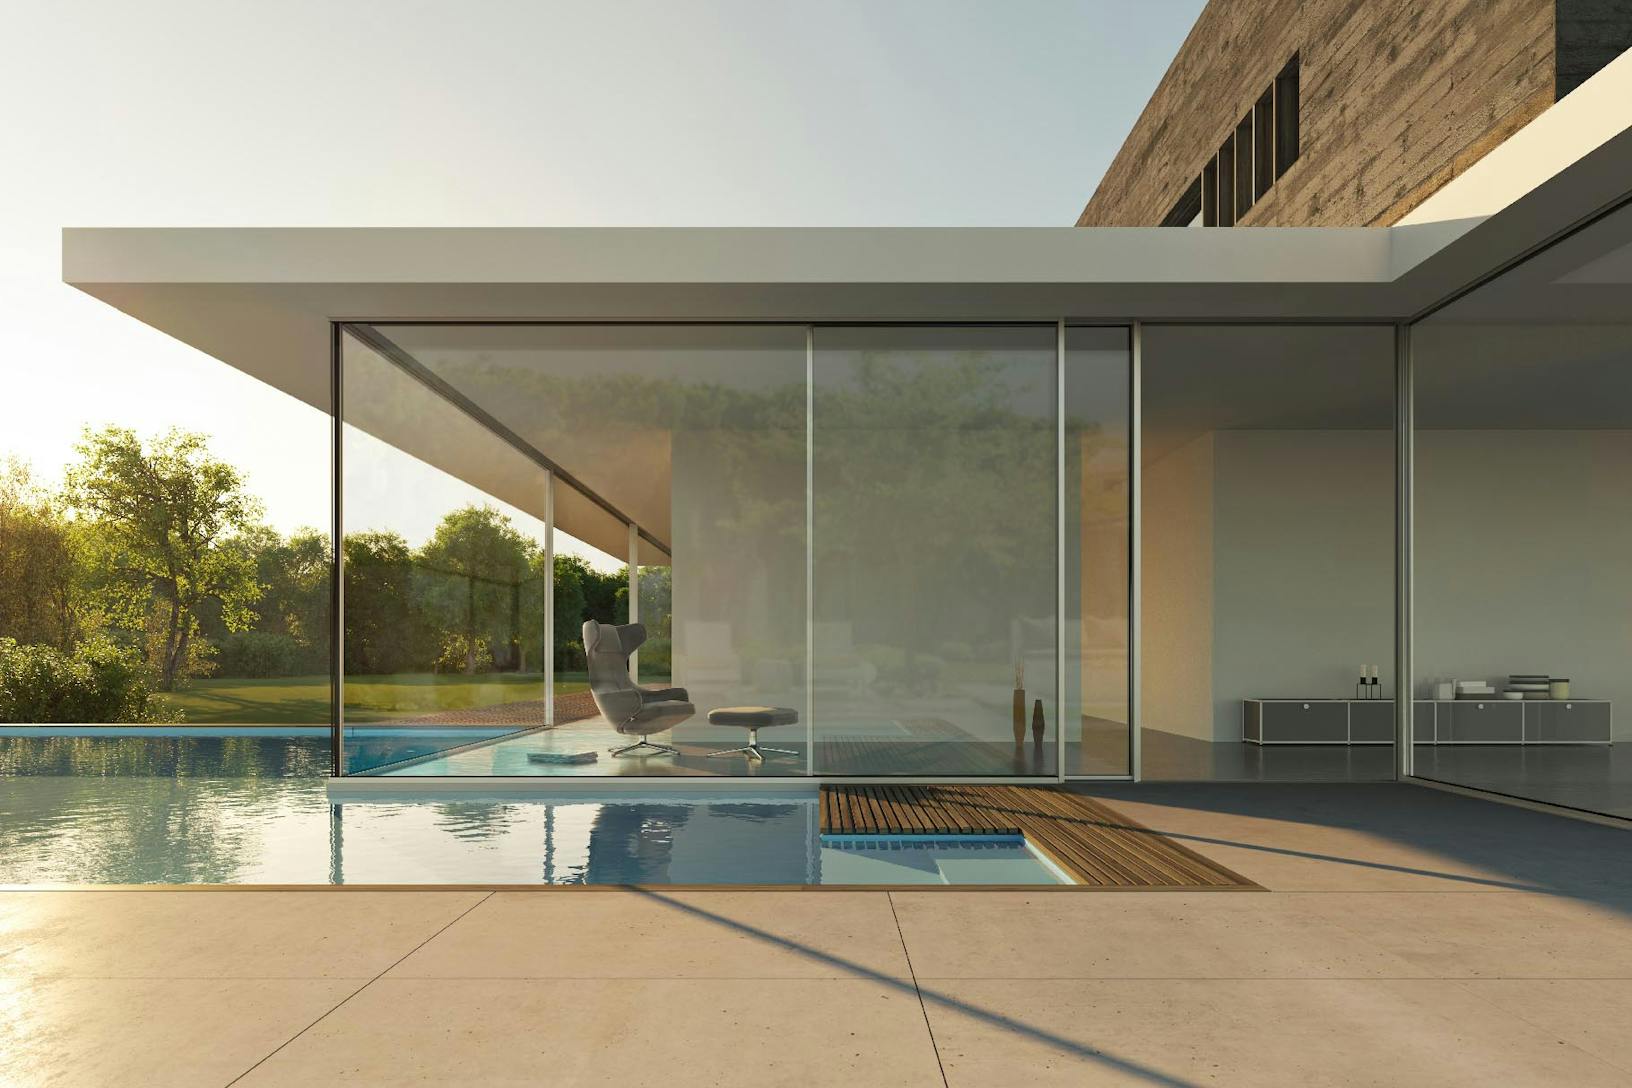 cero spa pool with minimal sliding glass walls - Opening exterior